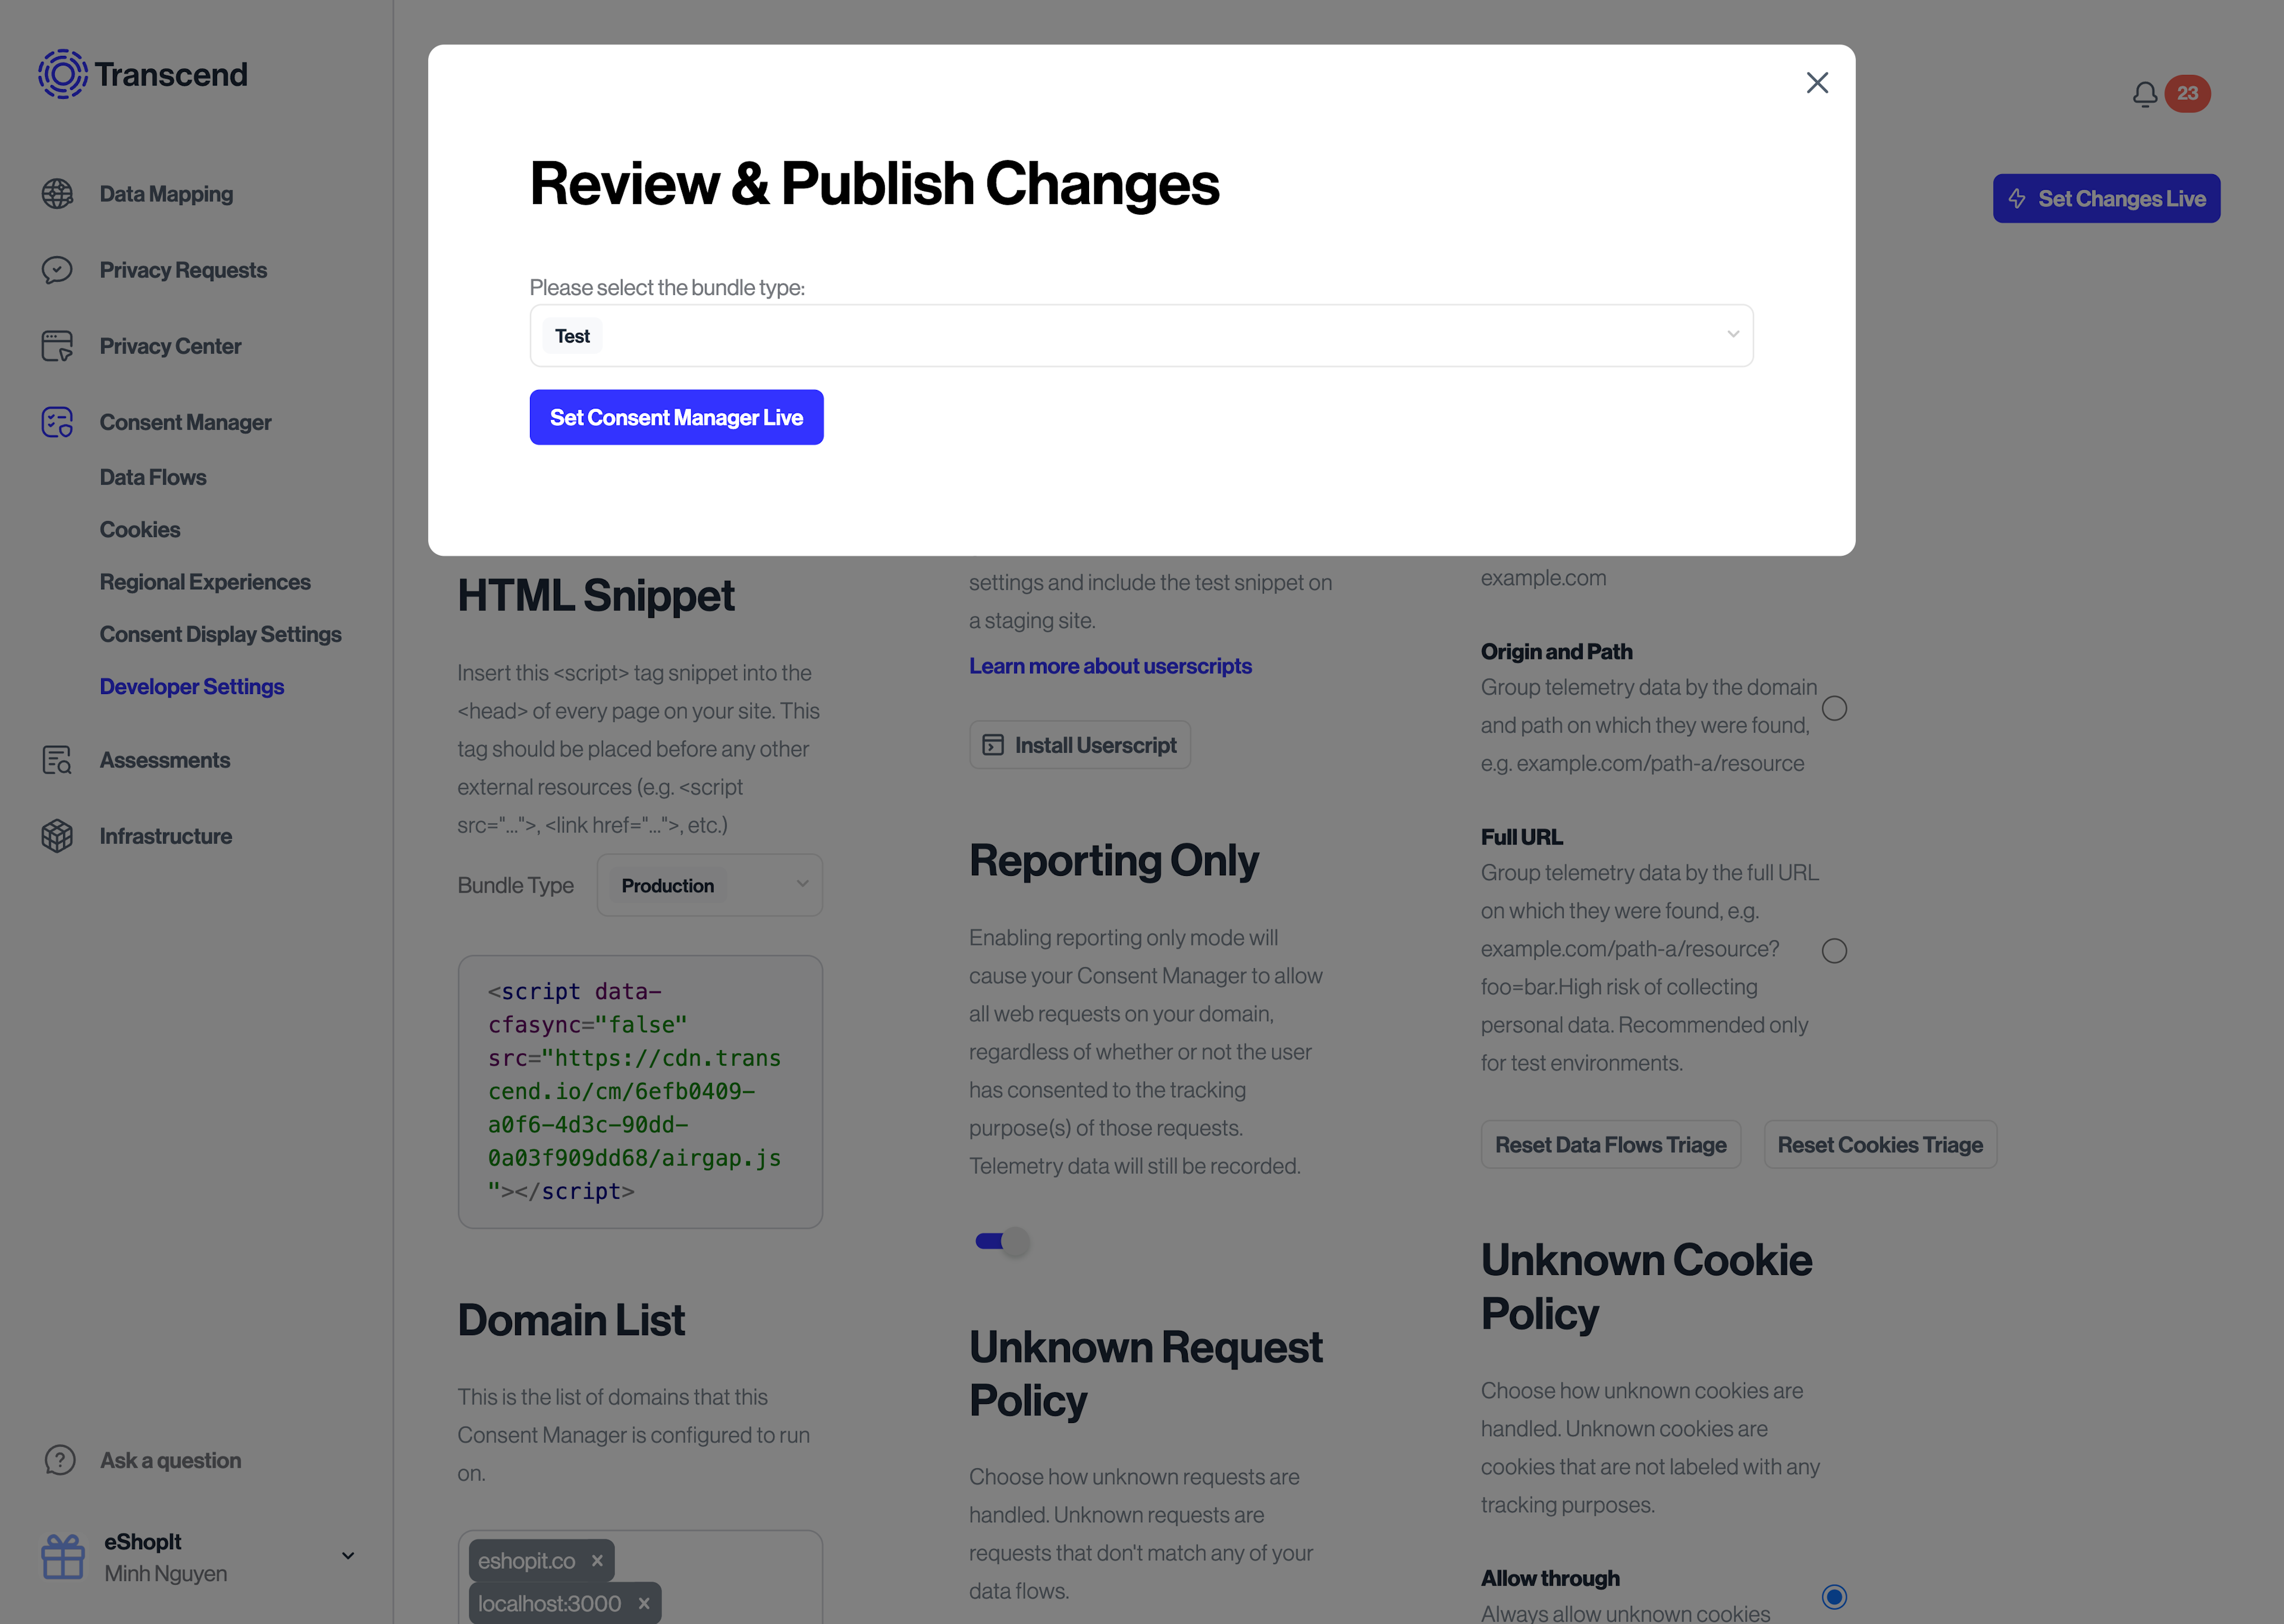 Modal to Review and Publish Changes For Consent